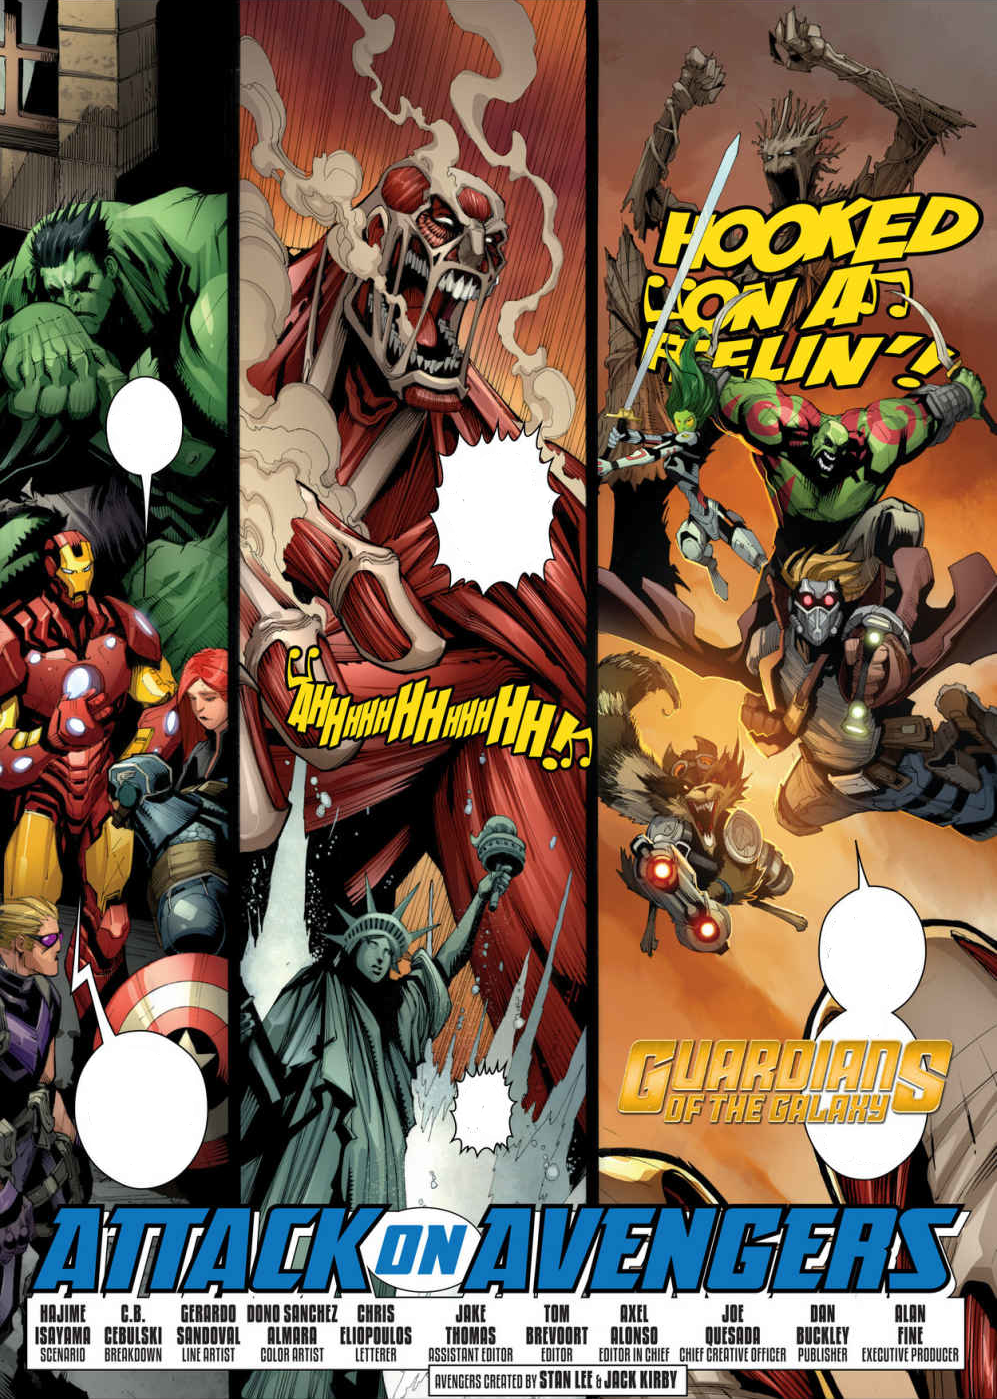 The Avengers Android Apk - Colaboratory